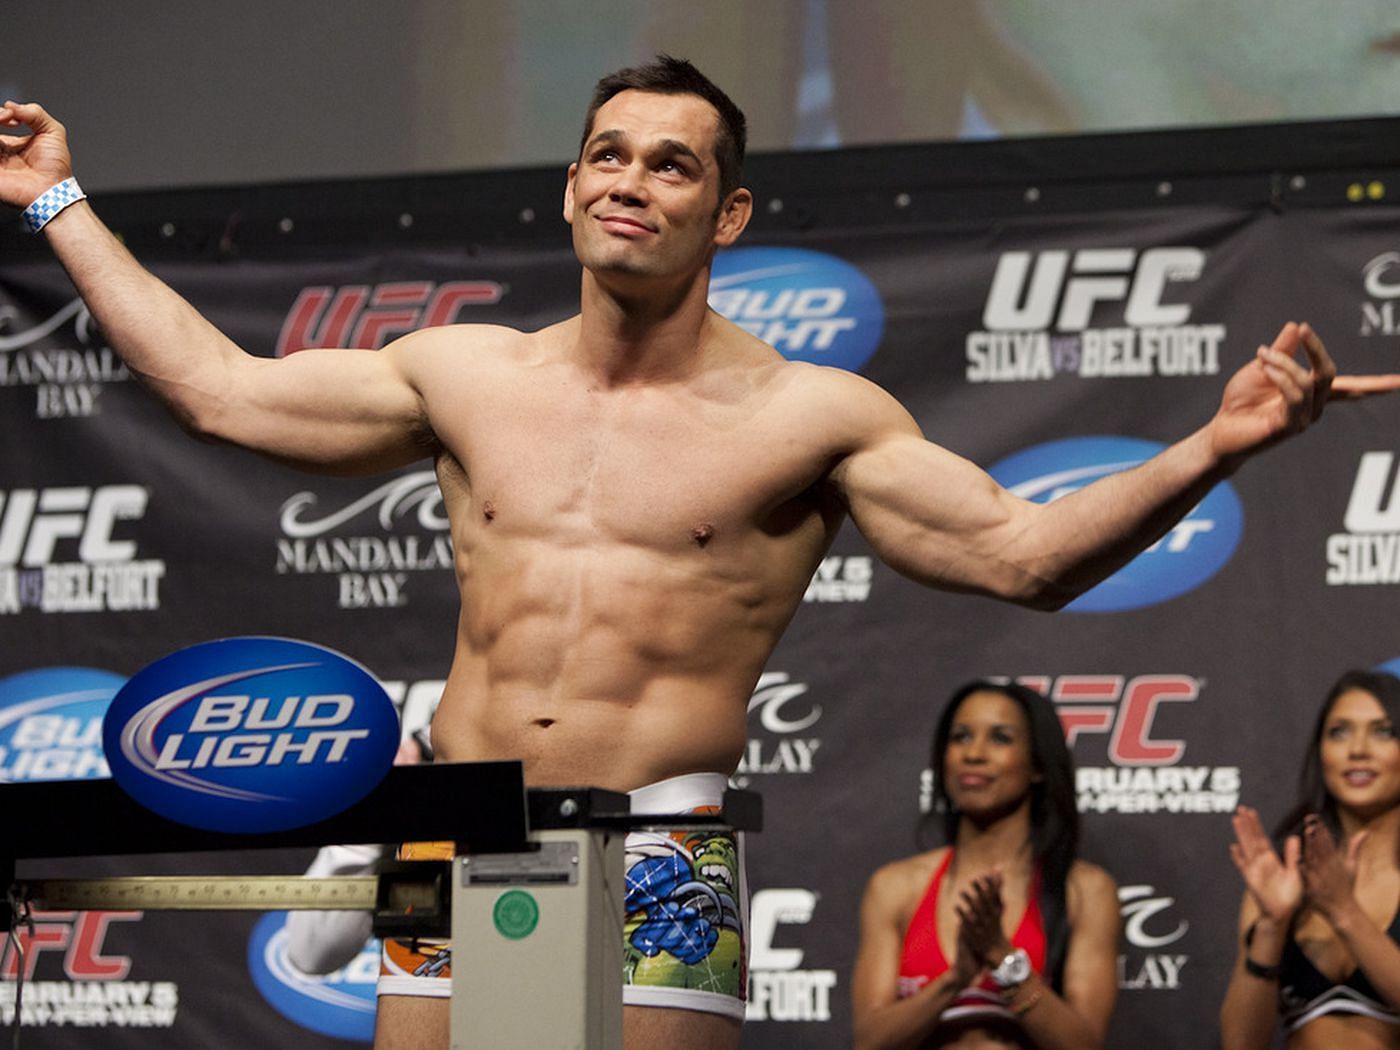 In a world without Anderson Silva, Rich Franklin might be far better remembered as the UFC&#039;s greatest middleweight.